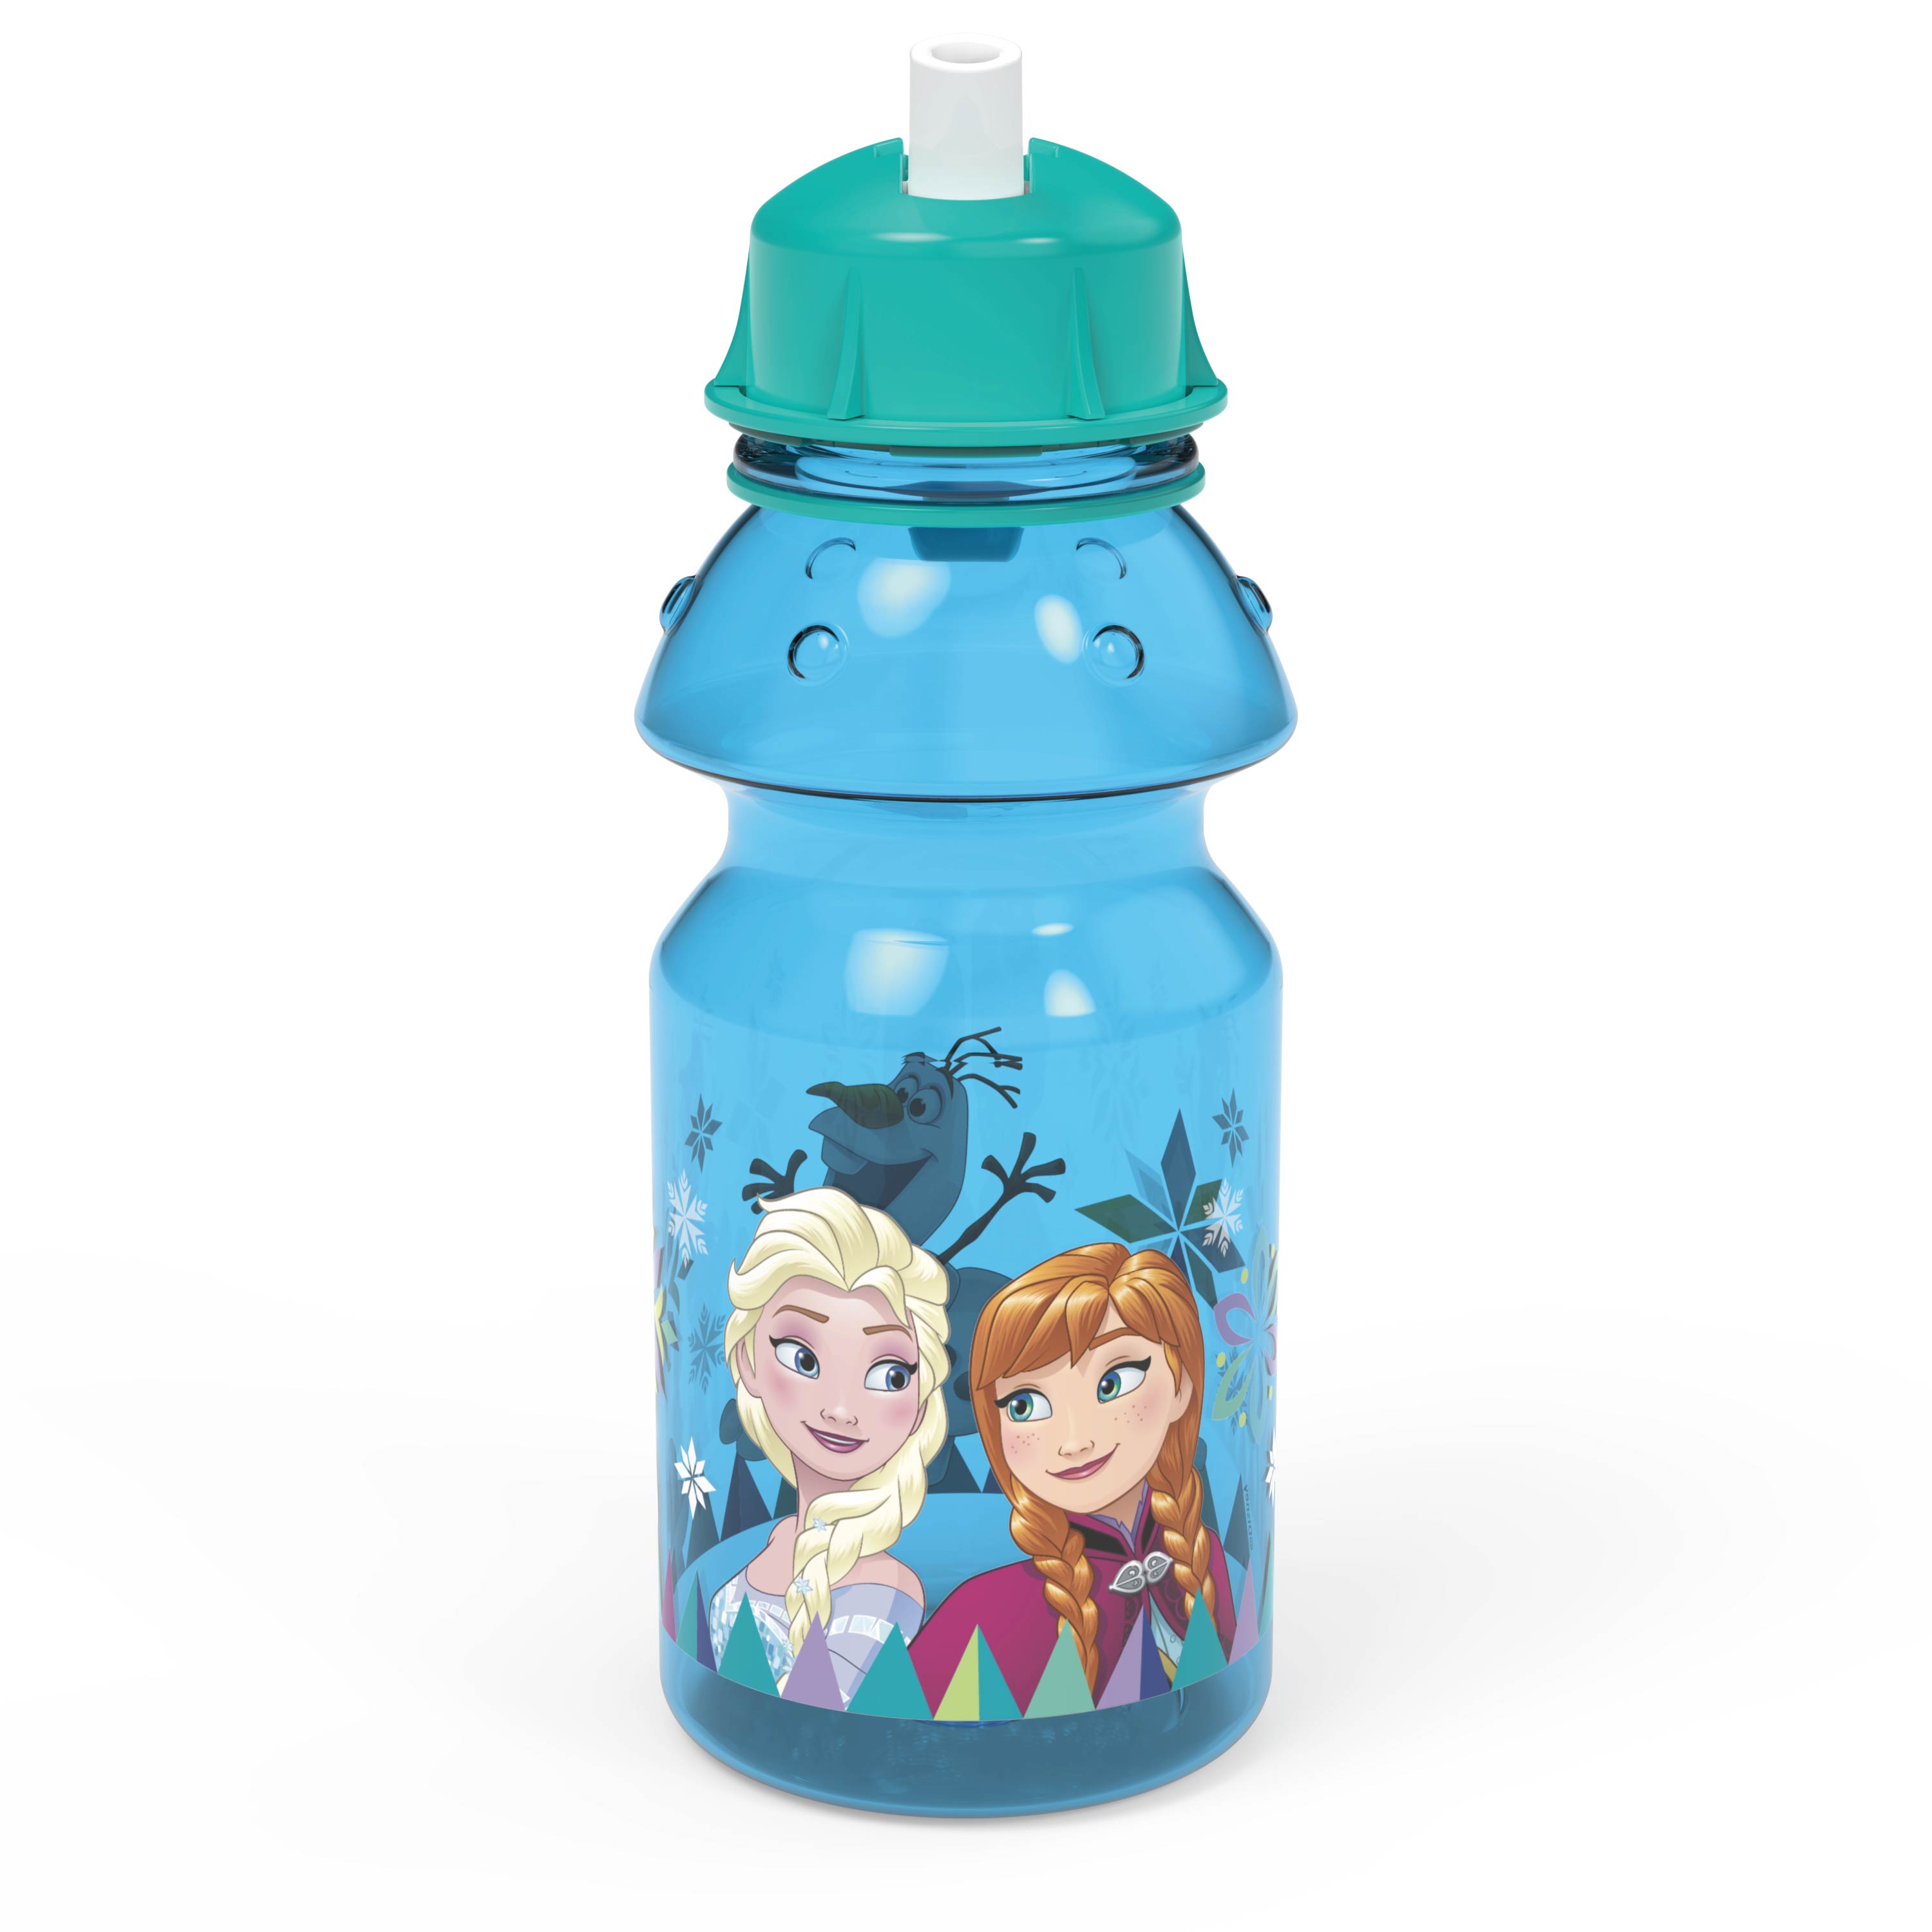 Elsa and Olaf Disney Frozen Lunch Box and Drinks Bottle with Anna 